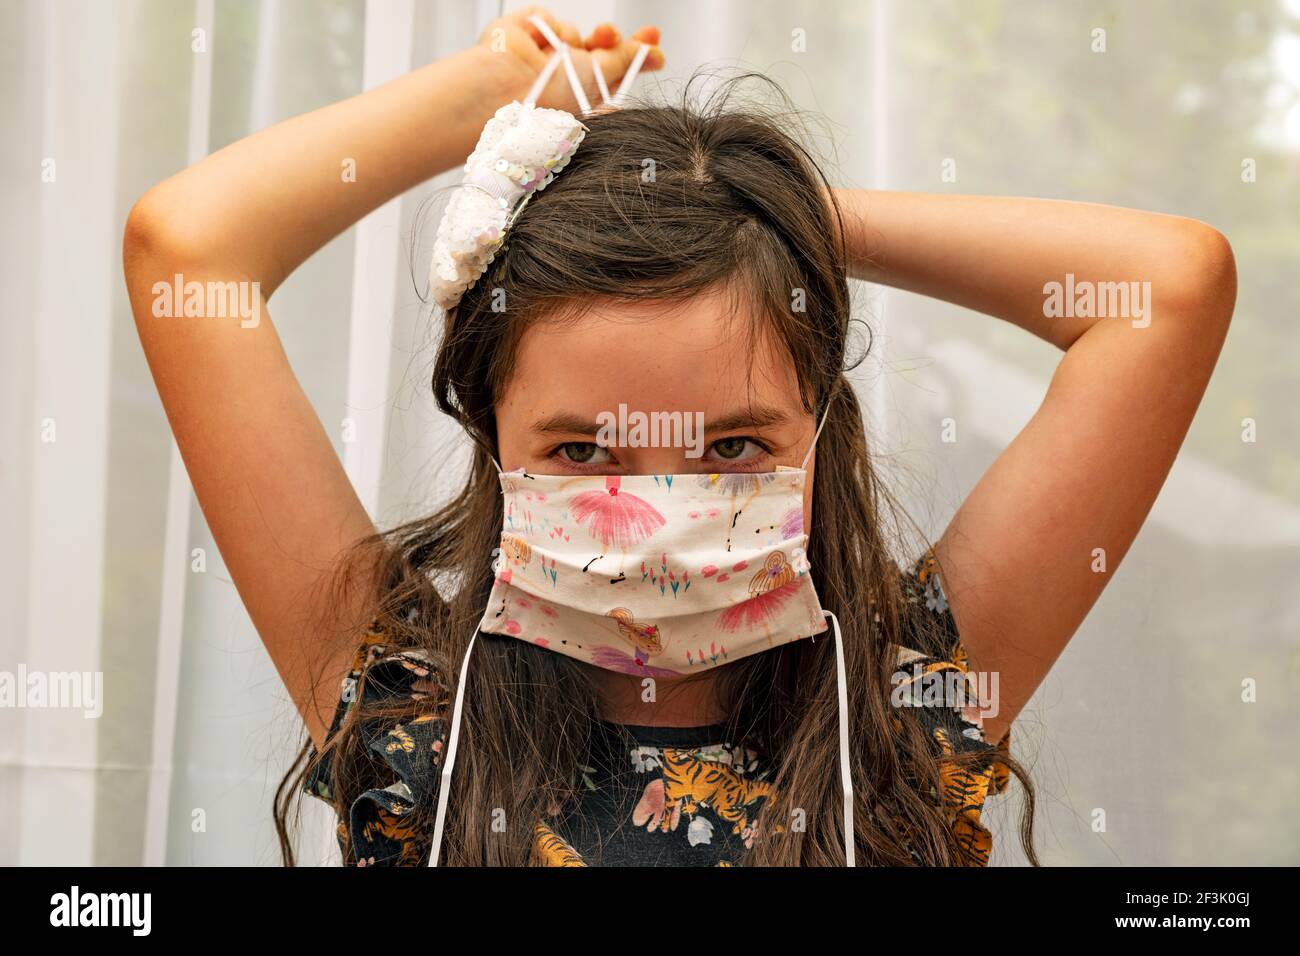 Young girl fitting homemade facemask Stock Photo